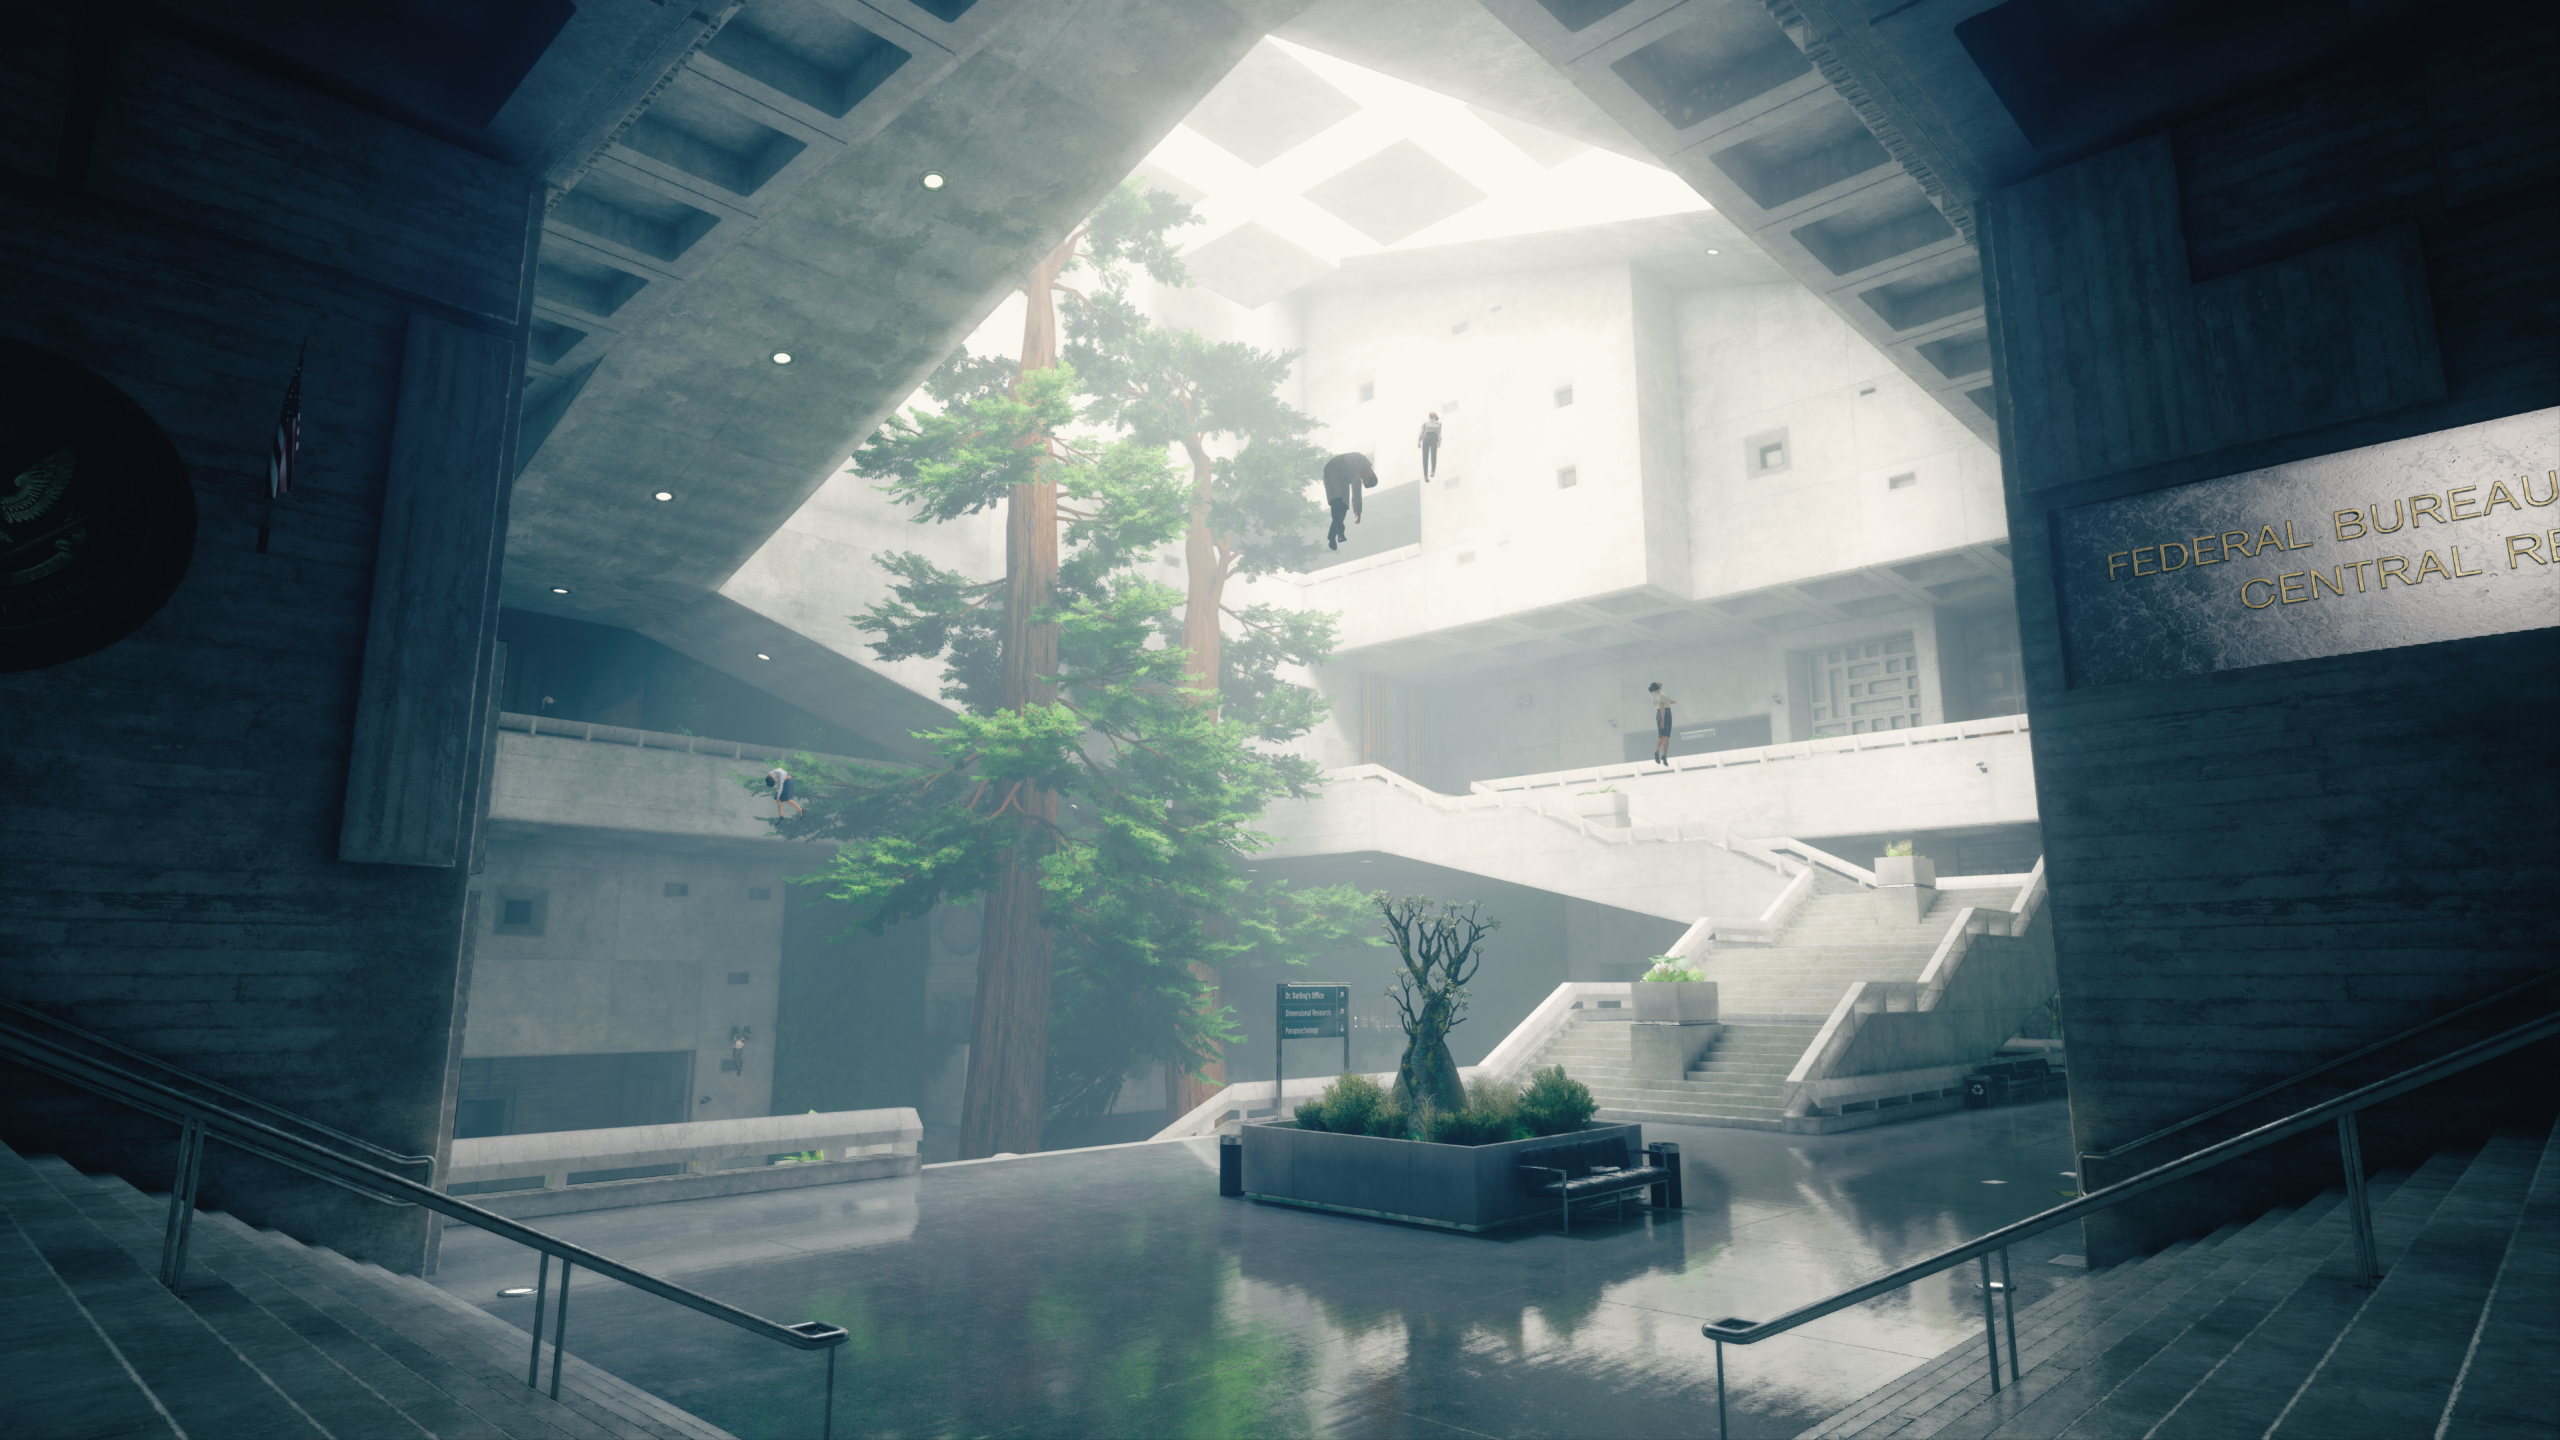 Interior screenshot of a multistory atrium with trees growing at the center